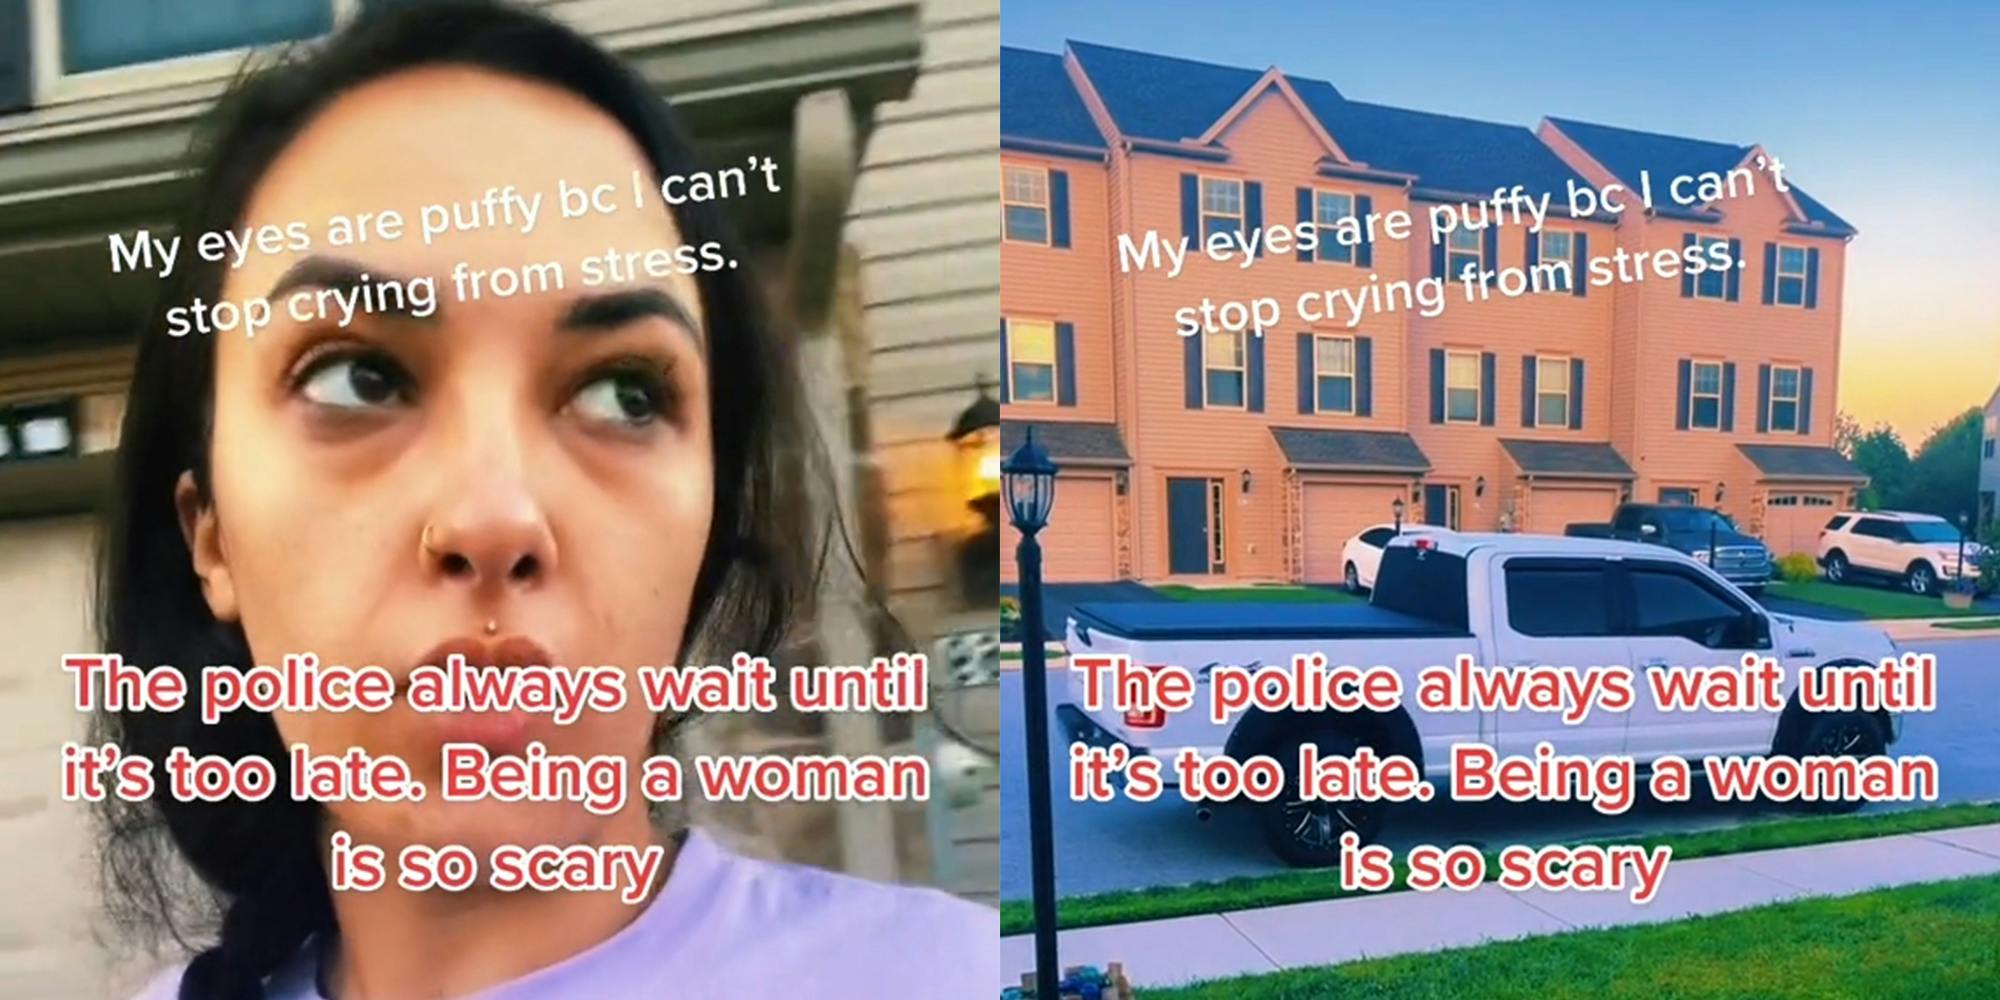 woman (l) truck parked in front of house (r) both with caption "My eyes are puffy bc I can't stop crying from stress. The police always wait until it's too late. Being a woman is so scary"